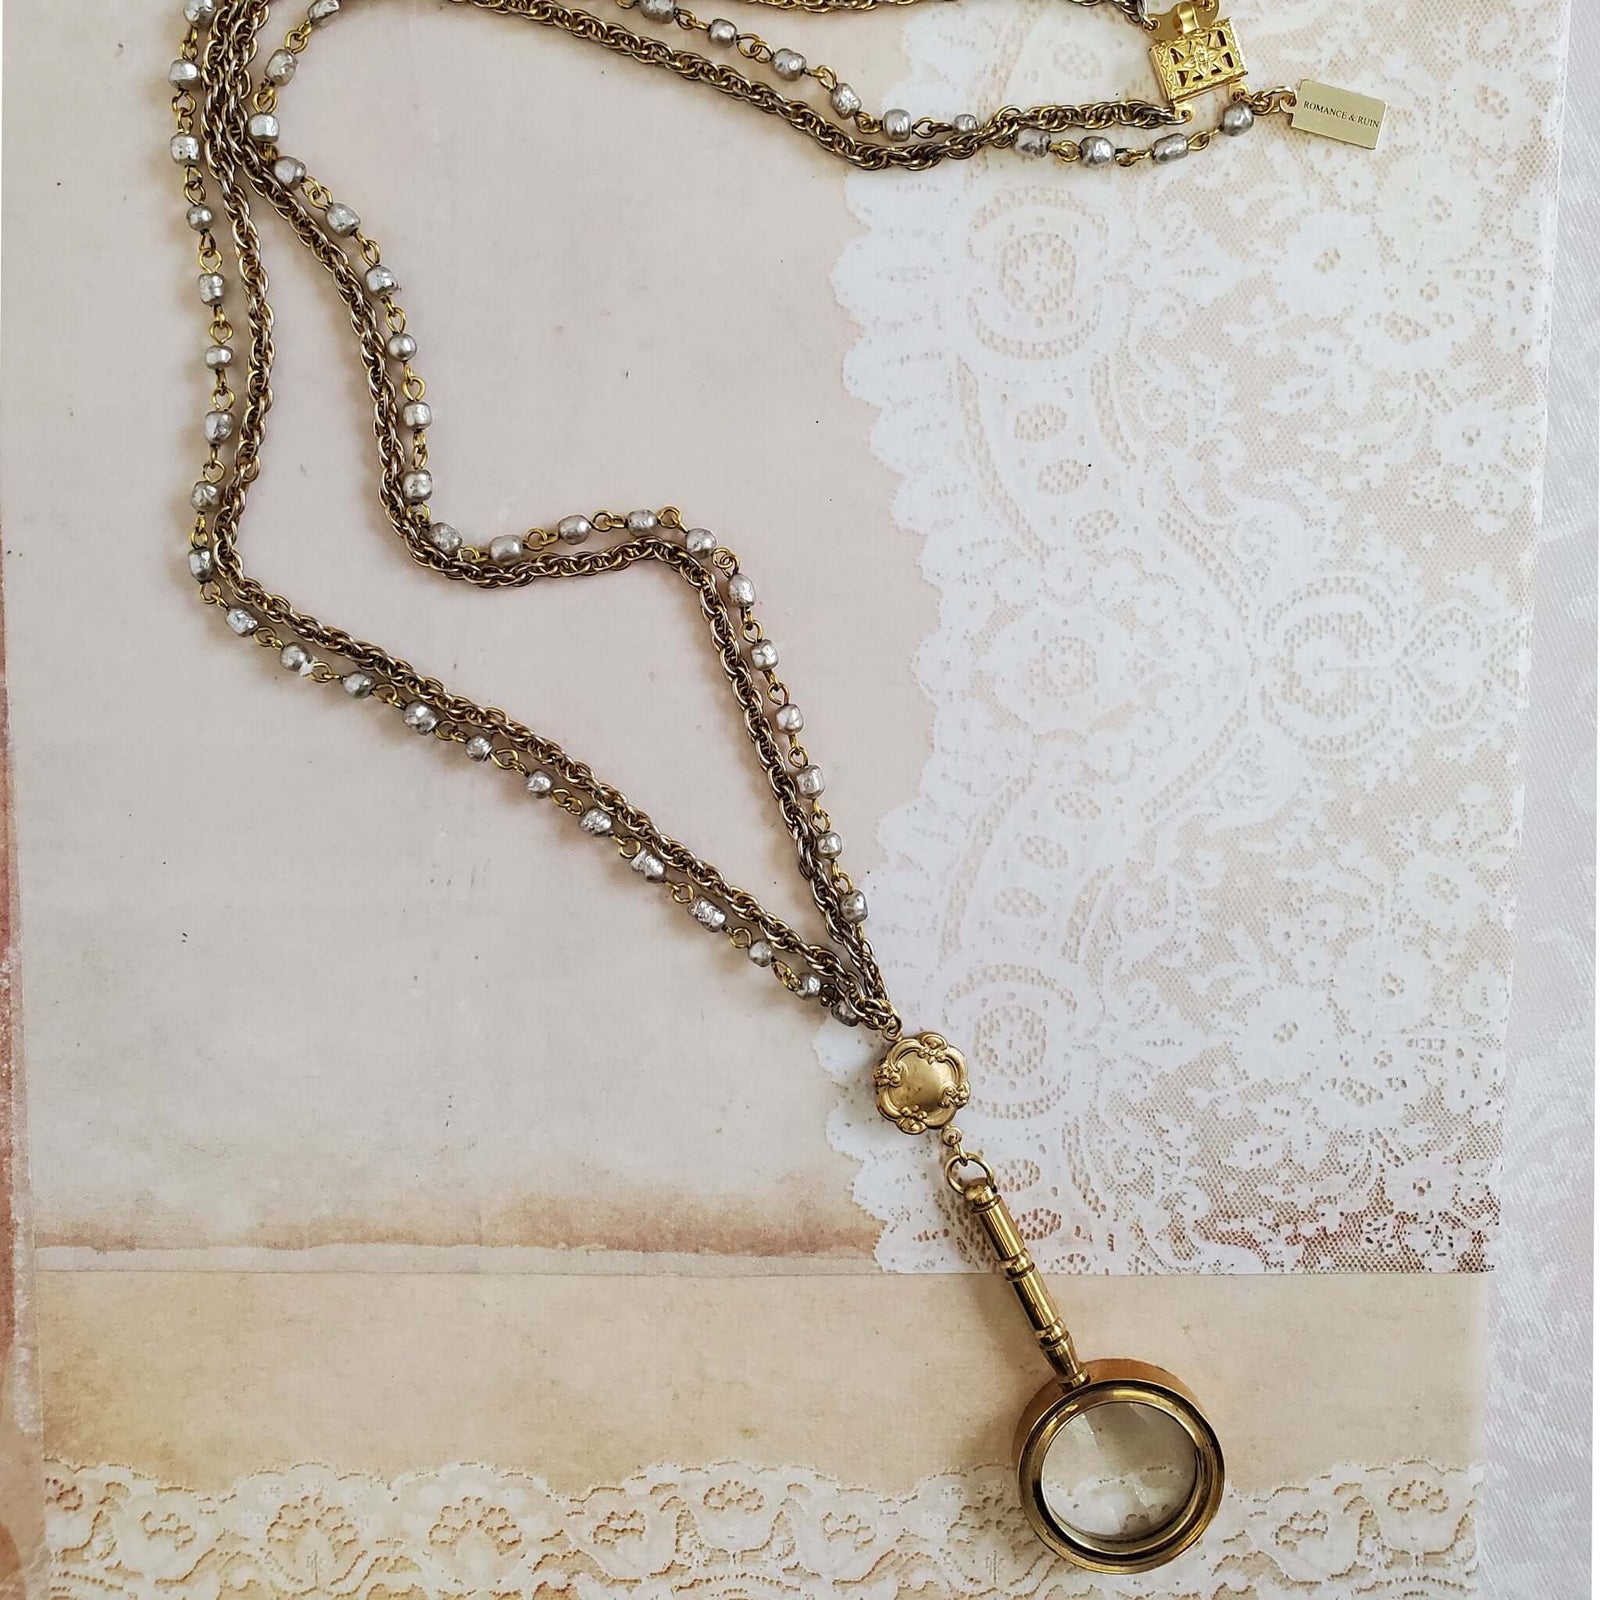 1928 Filigree Heart Magnifying Glass Necklace, Women's, Silver